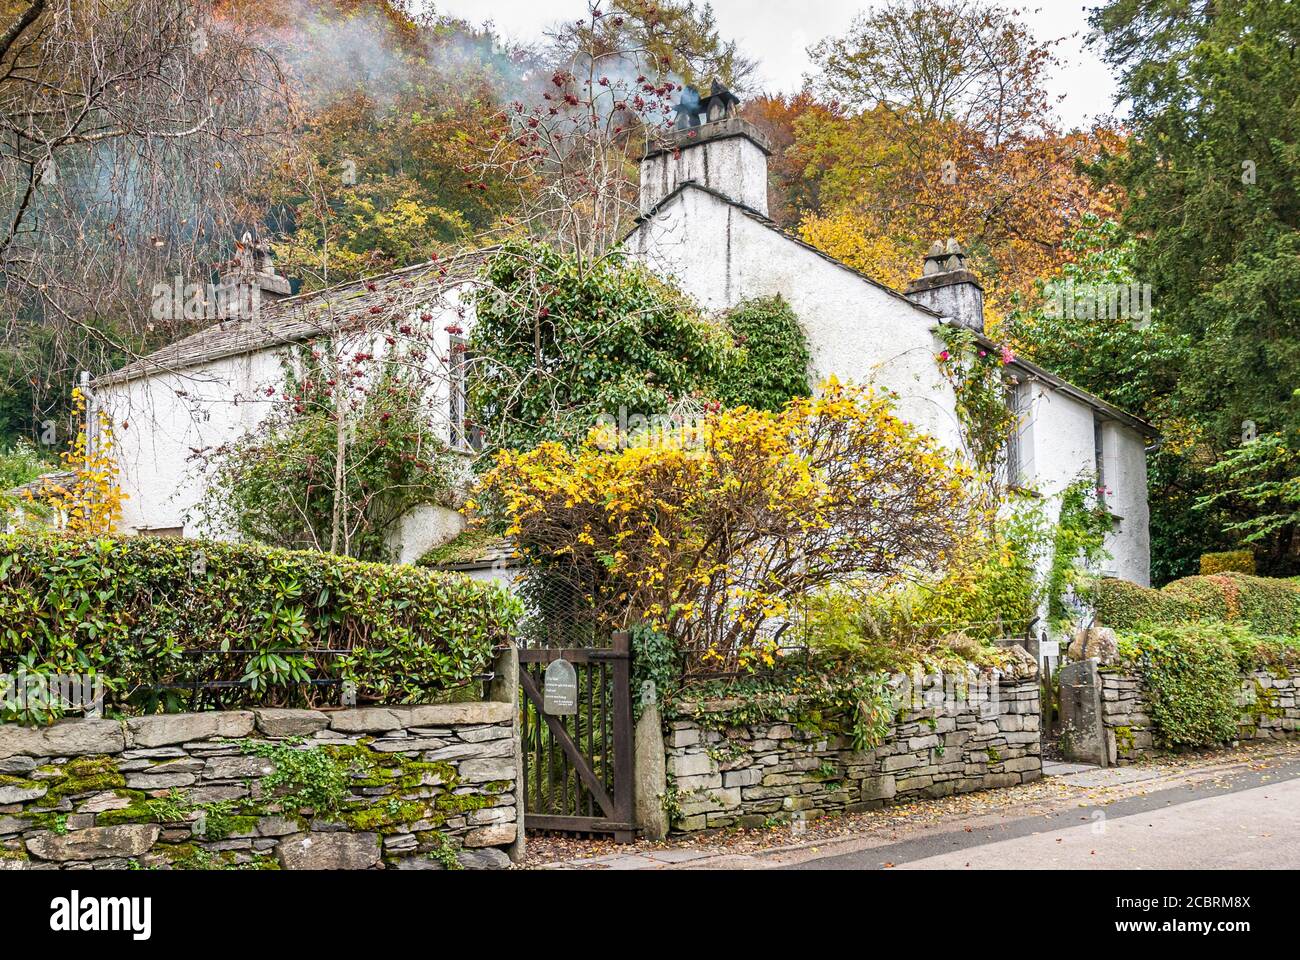 Dove Cottage in Grasmere in the English Lake District. Once home to the poet William Wordsworth and his wife Mary.. Stock Photo